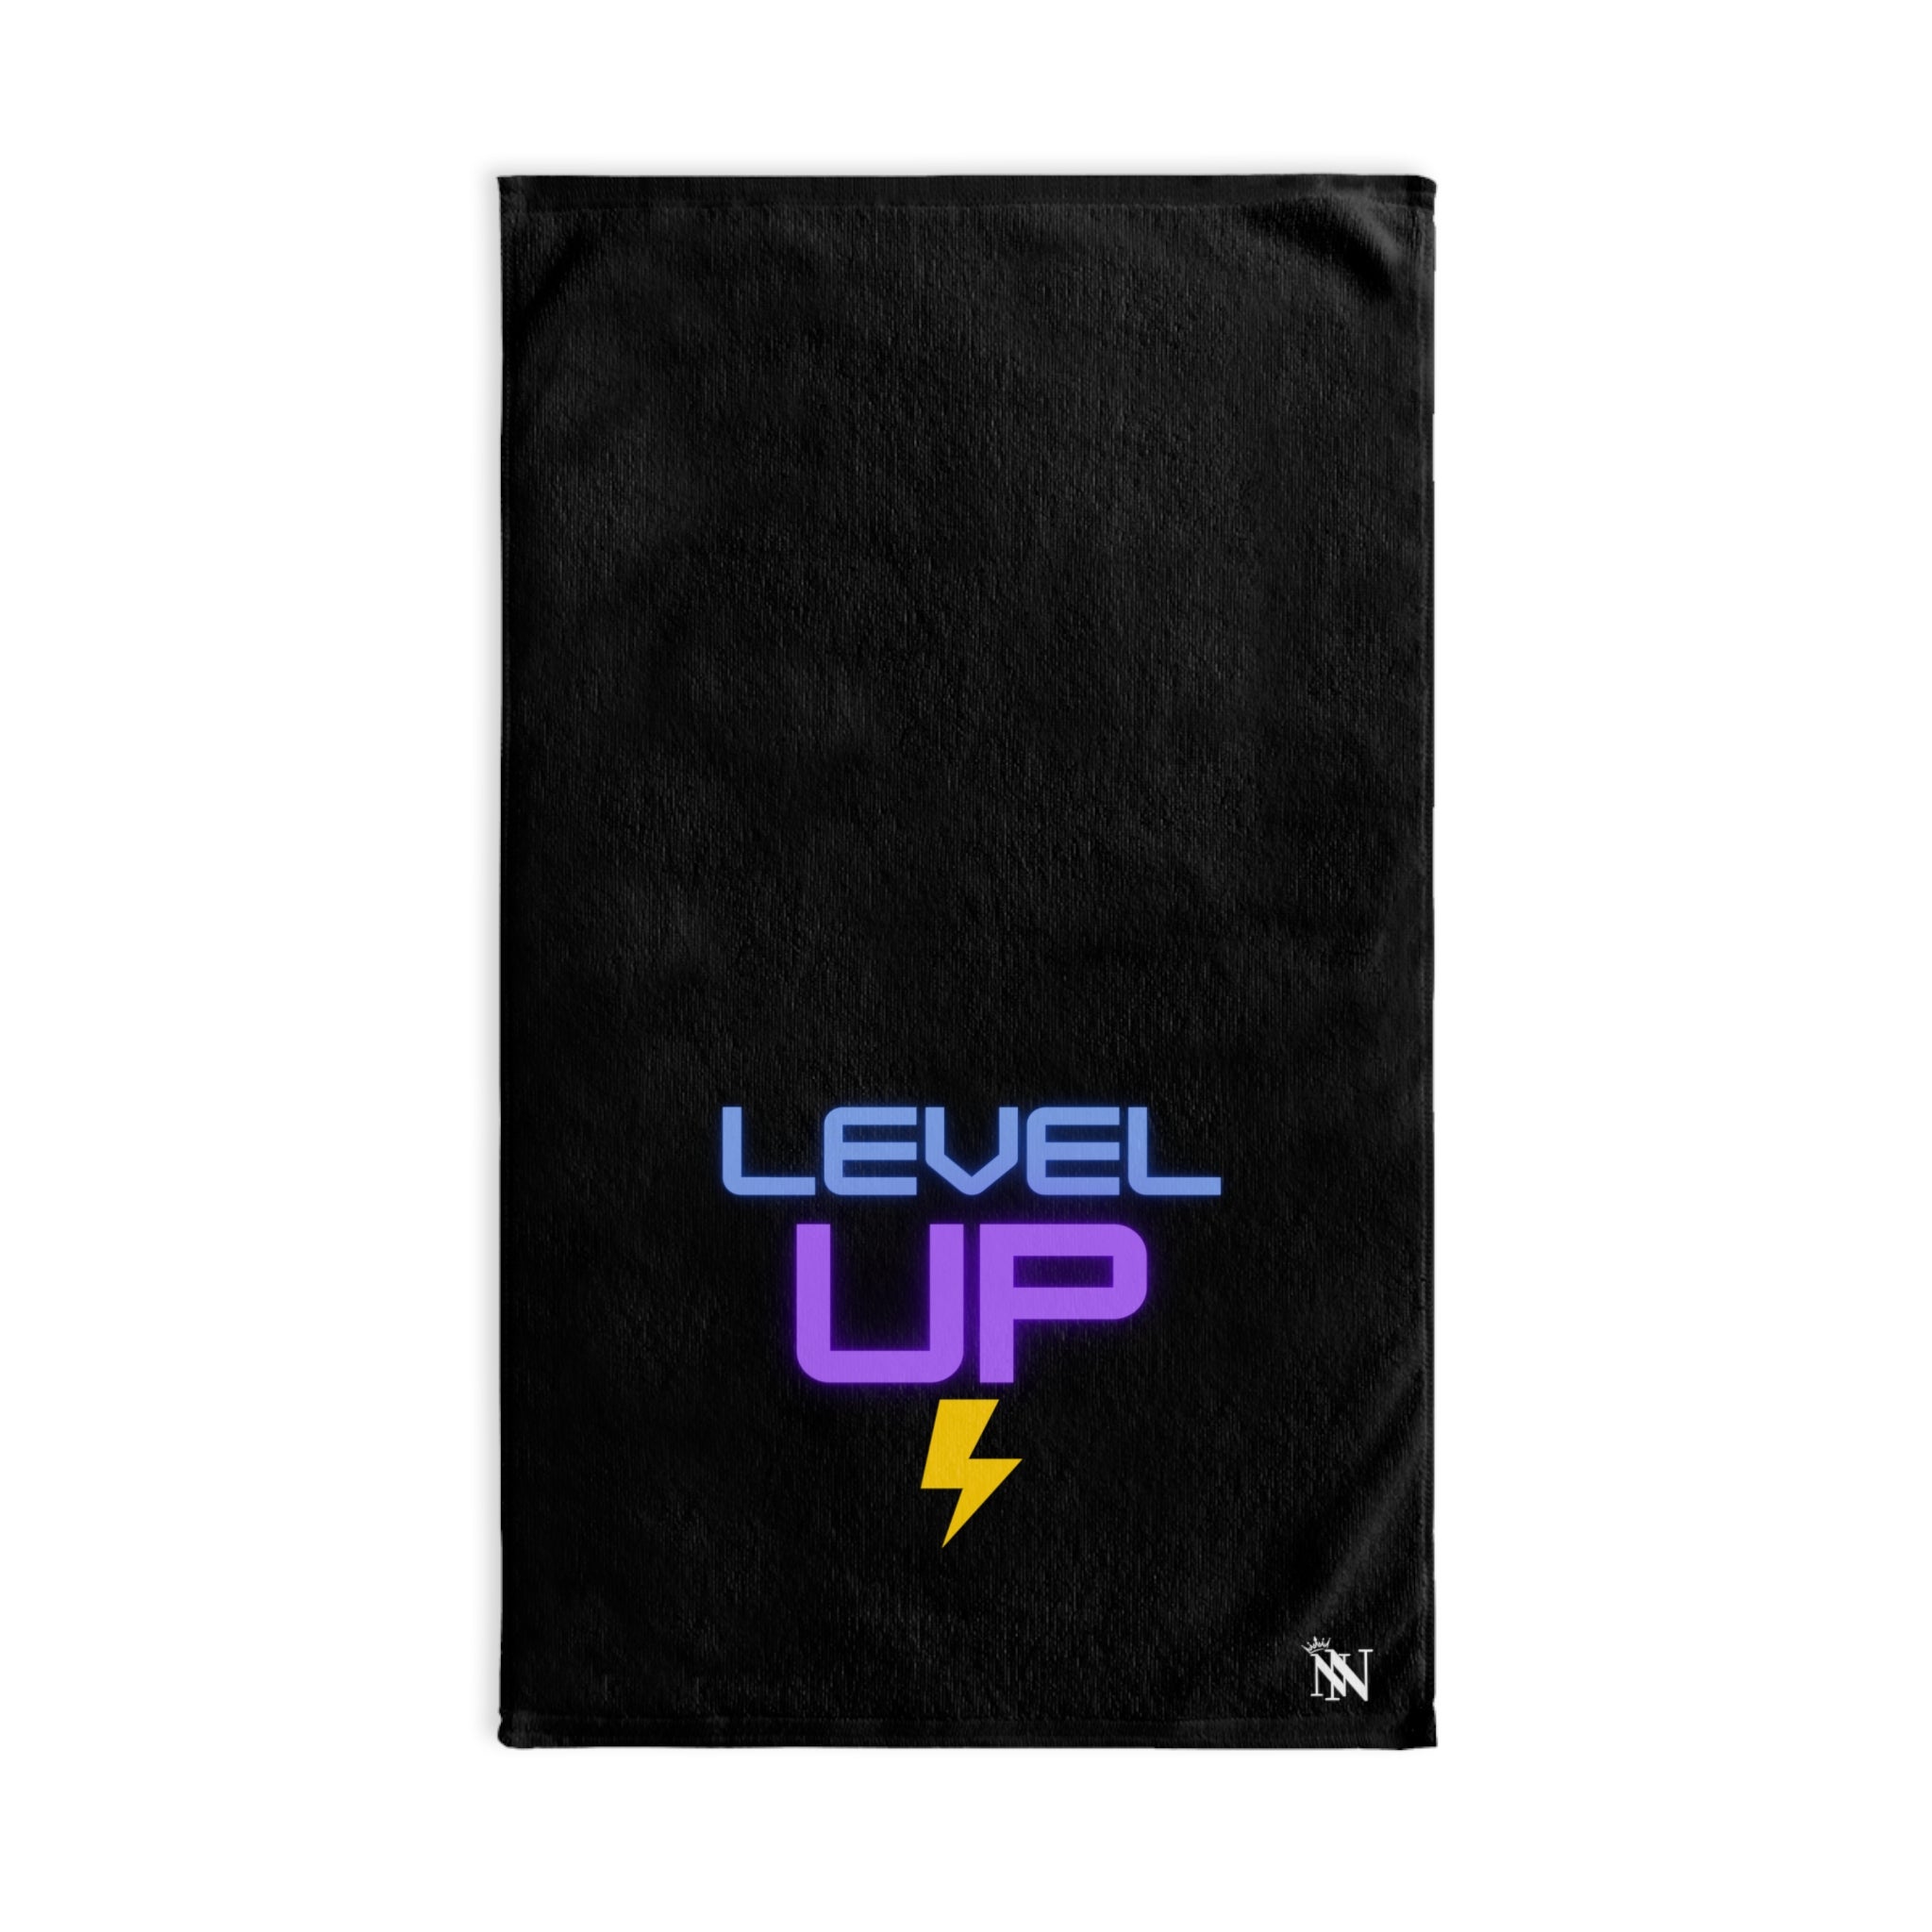 Level Up Black | Sexy Gifts for Boyfriend, Funny Towel Romantic Gift for Wedding Couple Fiance First Year 2nd Anniversary Valentines, Party Gag Gifts, Joke Humor Cloth for Husband Men BF NECTAR NAPKINS